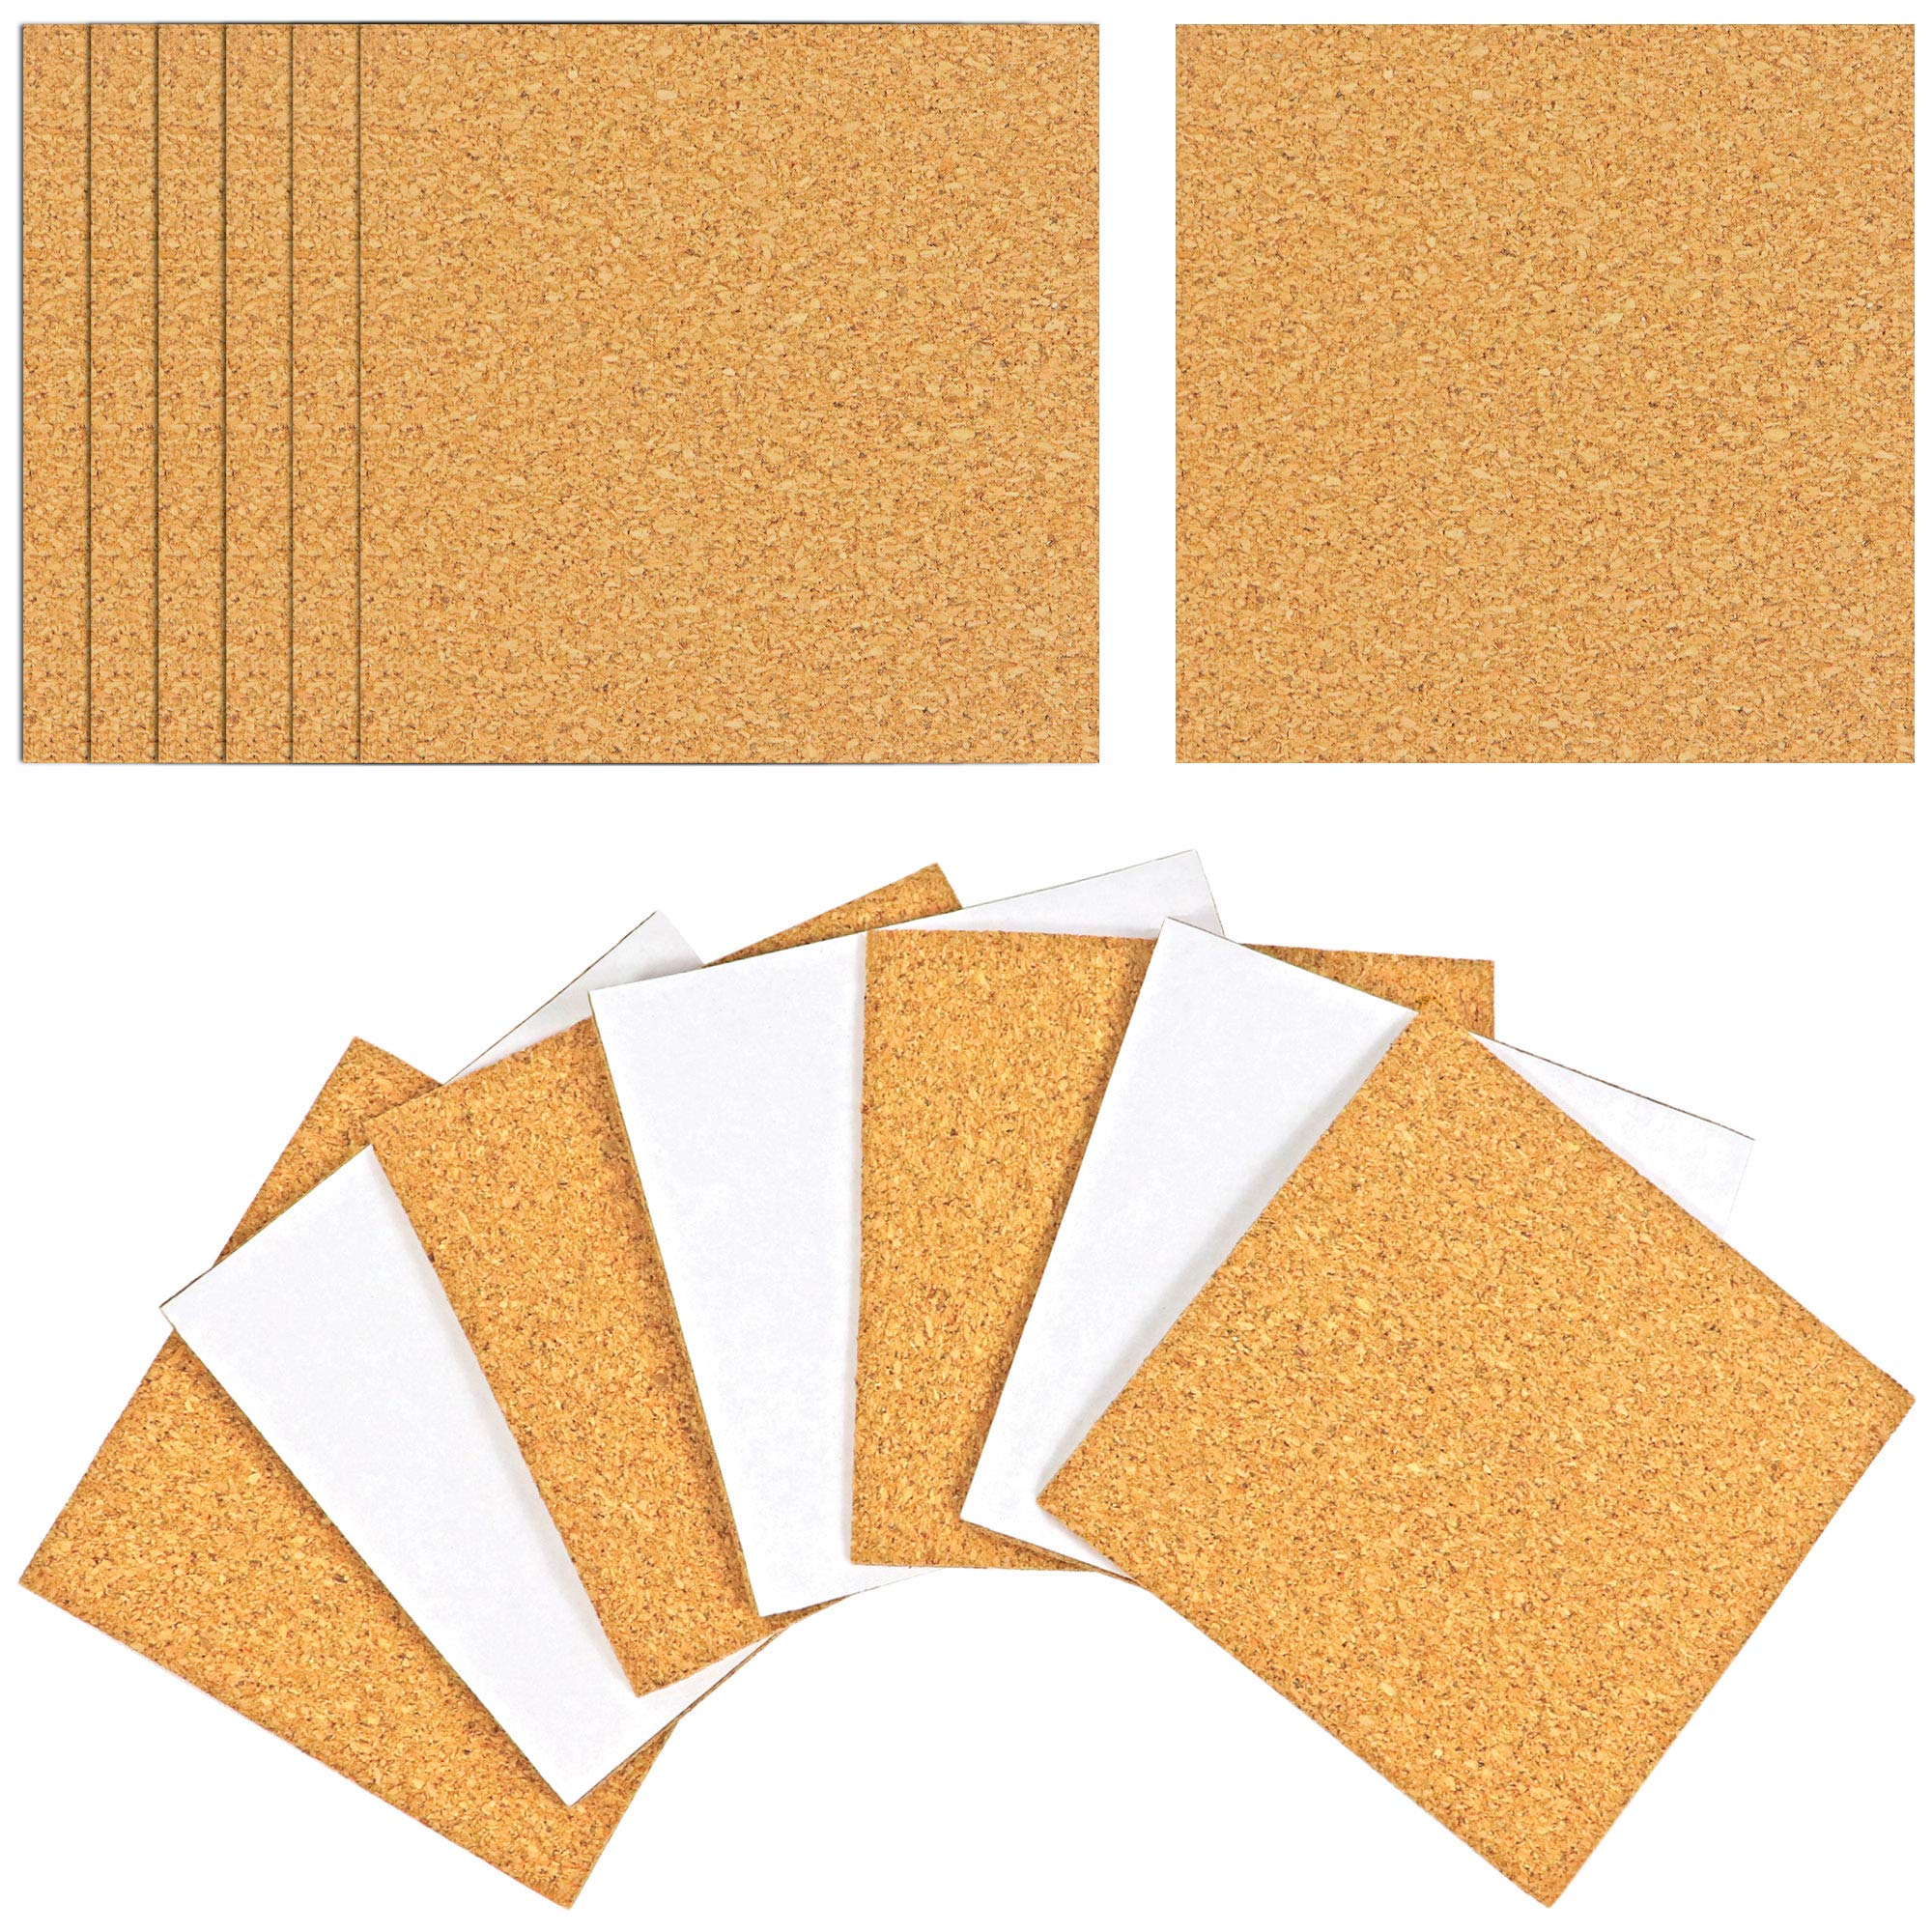 1/4 Craft Cork Sheets and Squares